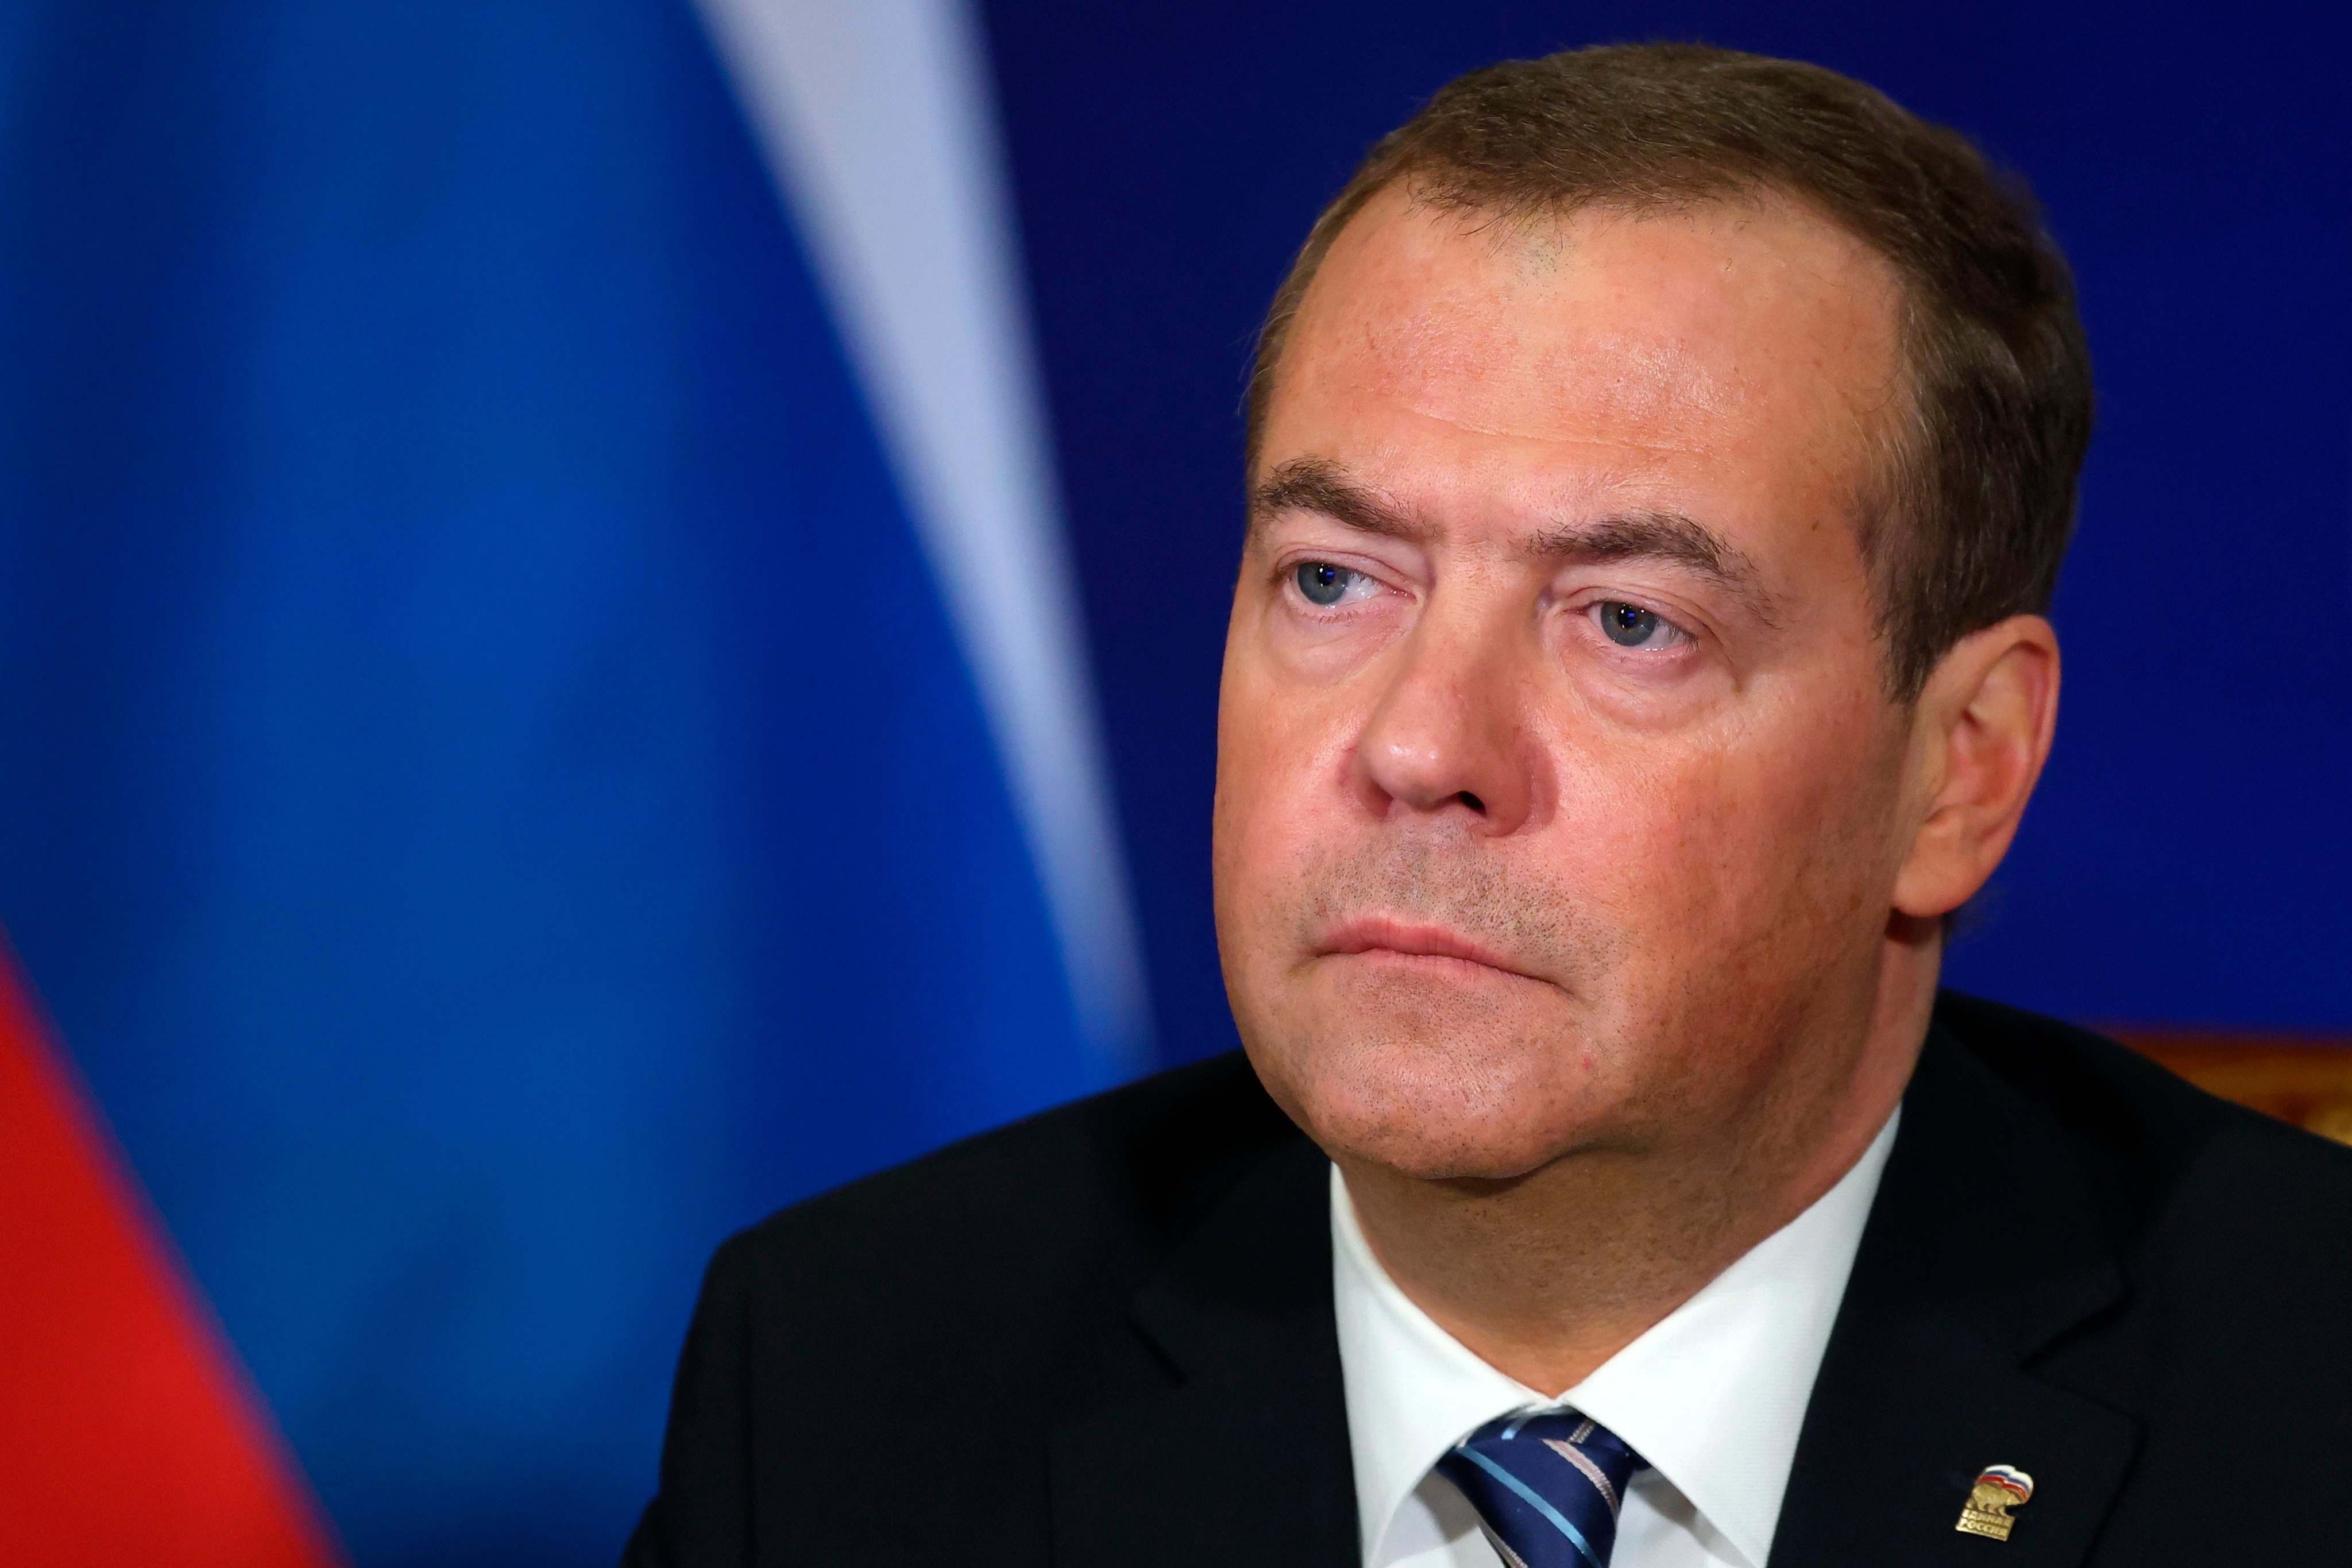 Former Russian President Dmitry Medvedev said “The world is sick and quite probably is on the verge of a new world war,”. Photo: Pool via AP